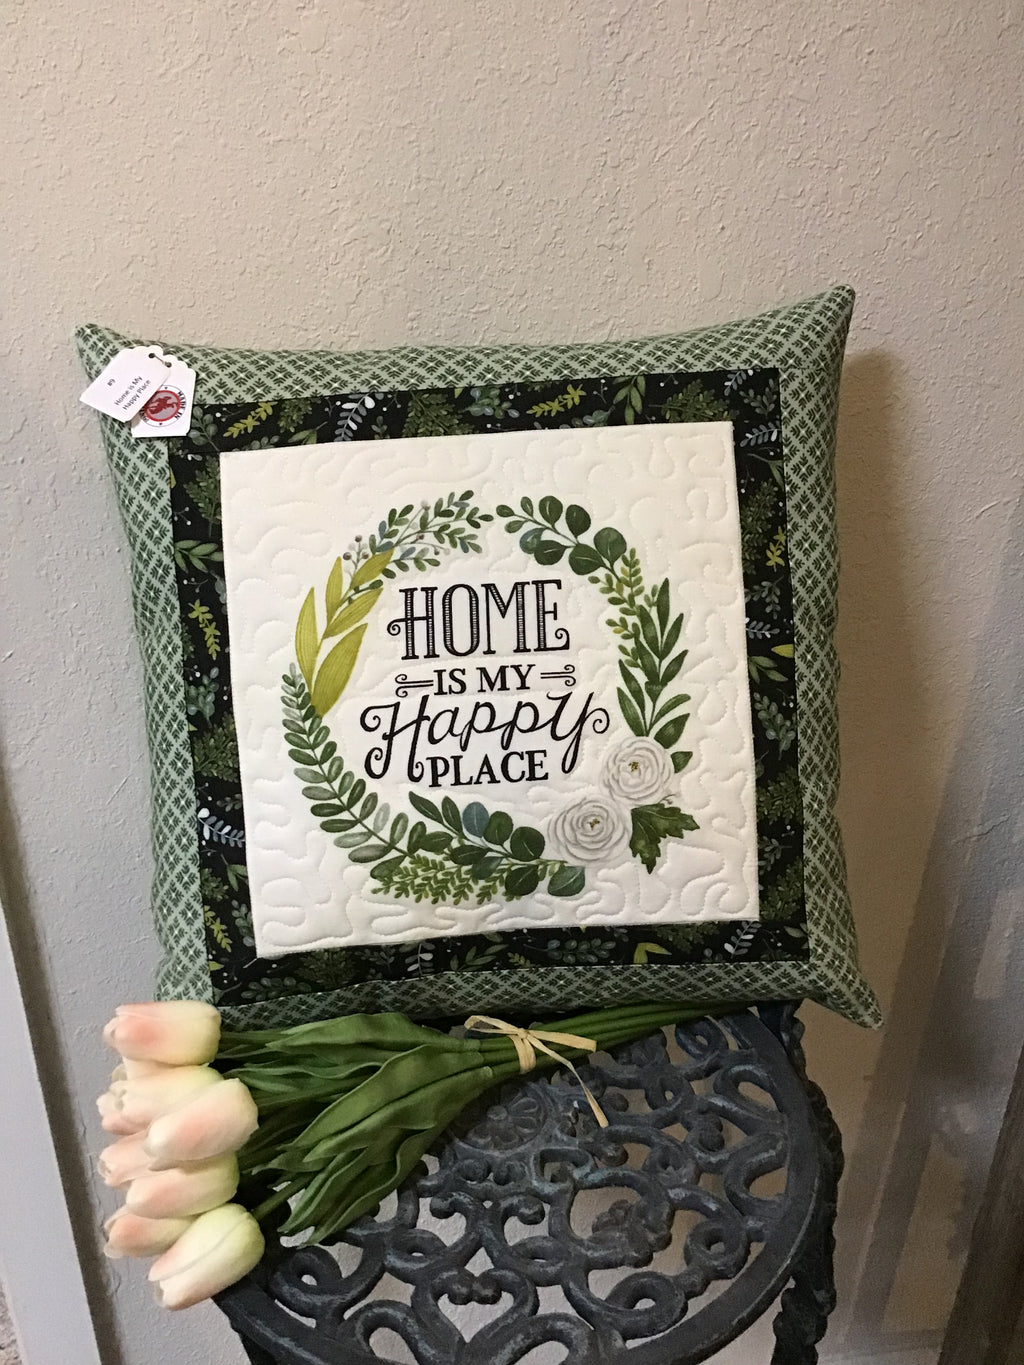 CHRIS' CREATIONS #9 Home Is My Happy Place Pillow